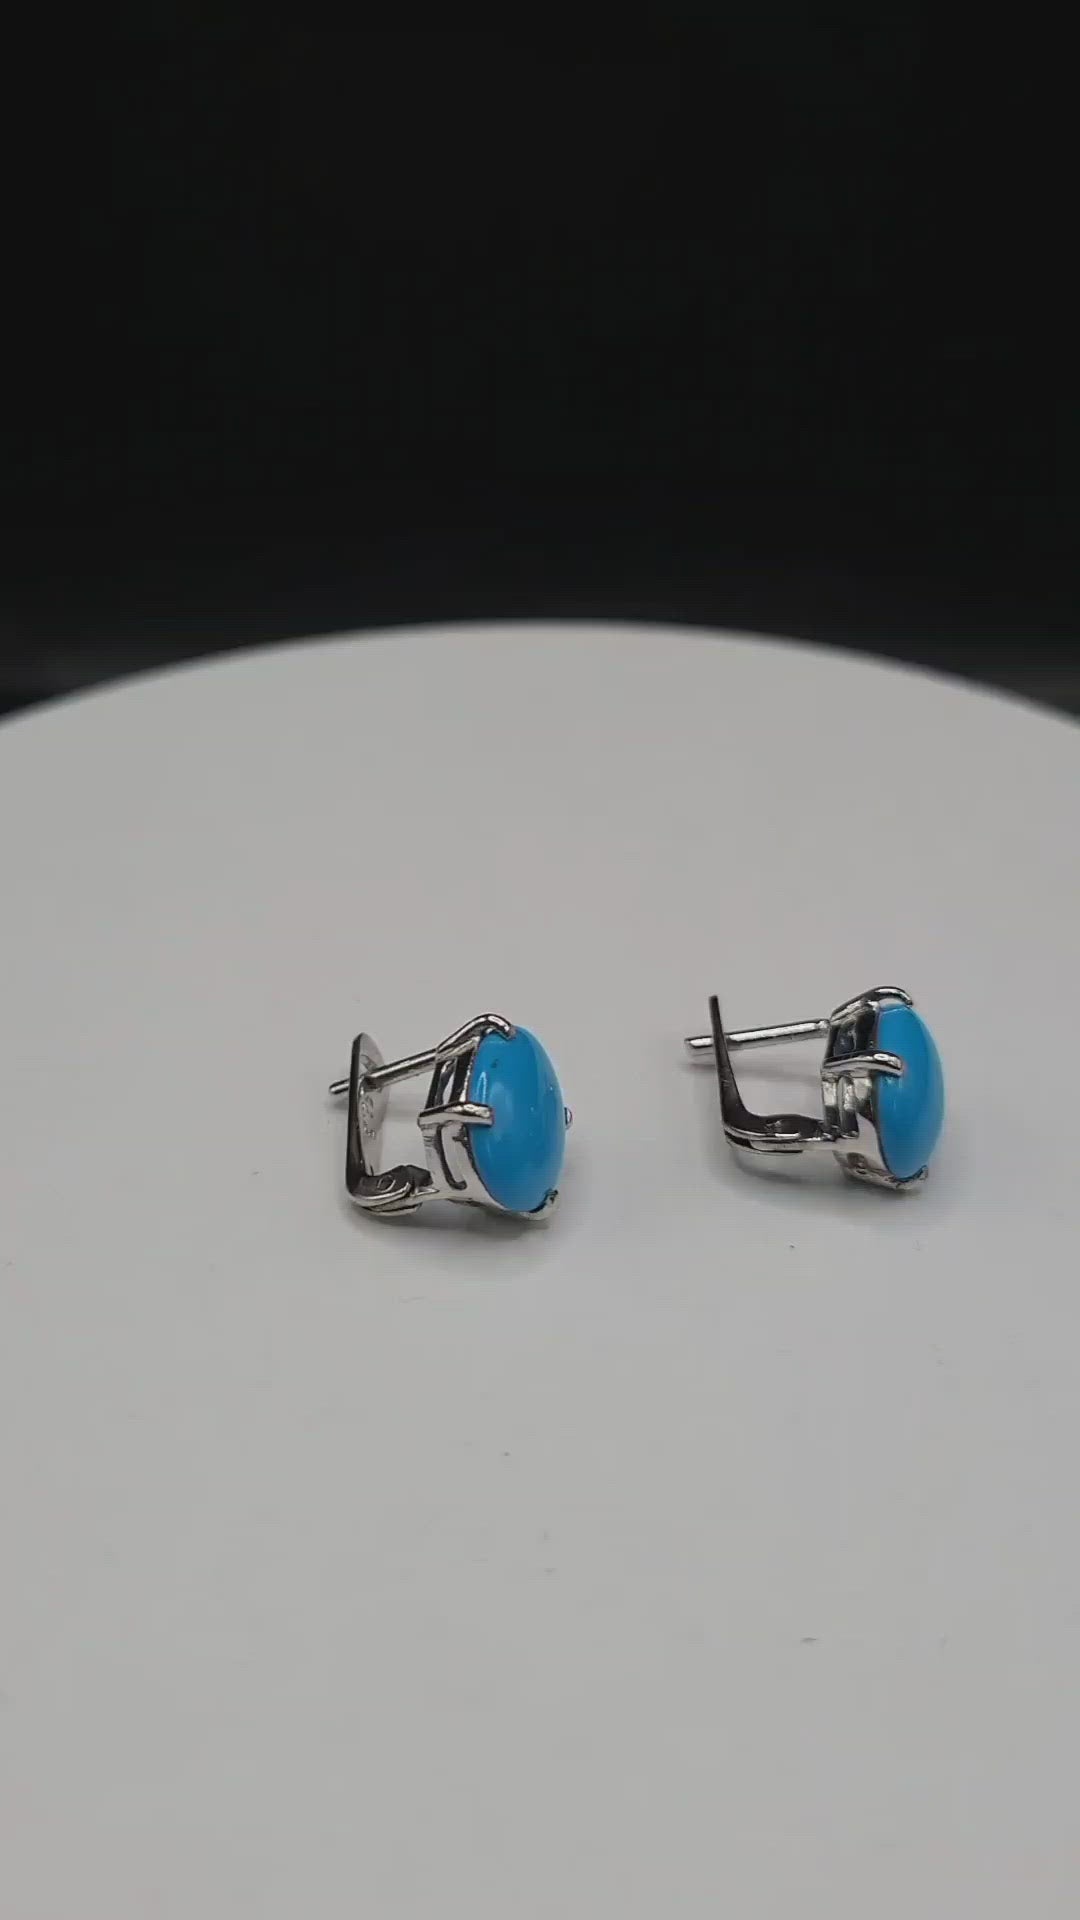 TURQUOISE STONE ON STERLING SILVER CLIP-ON EARRINGS. TURQUOISE IS ONE OF THE MOST SPIRITUAL STONES IN THE WORLD OF CRYSTALS.